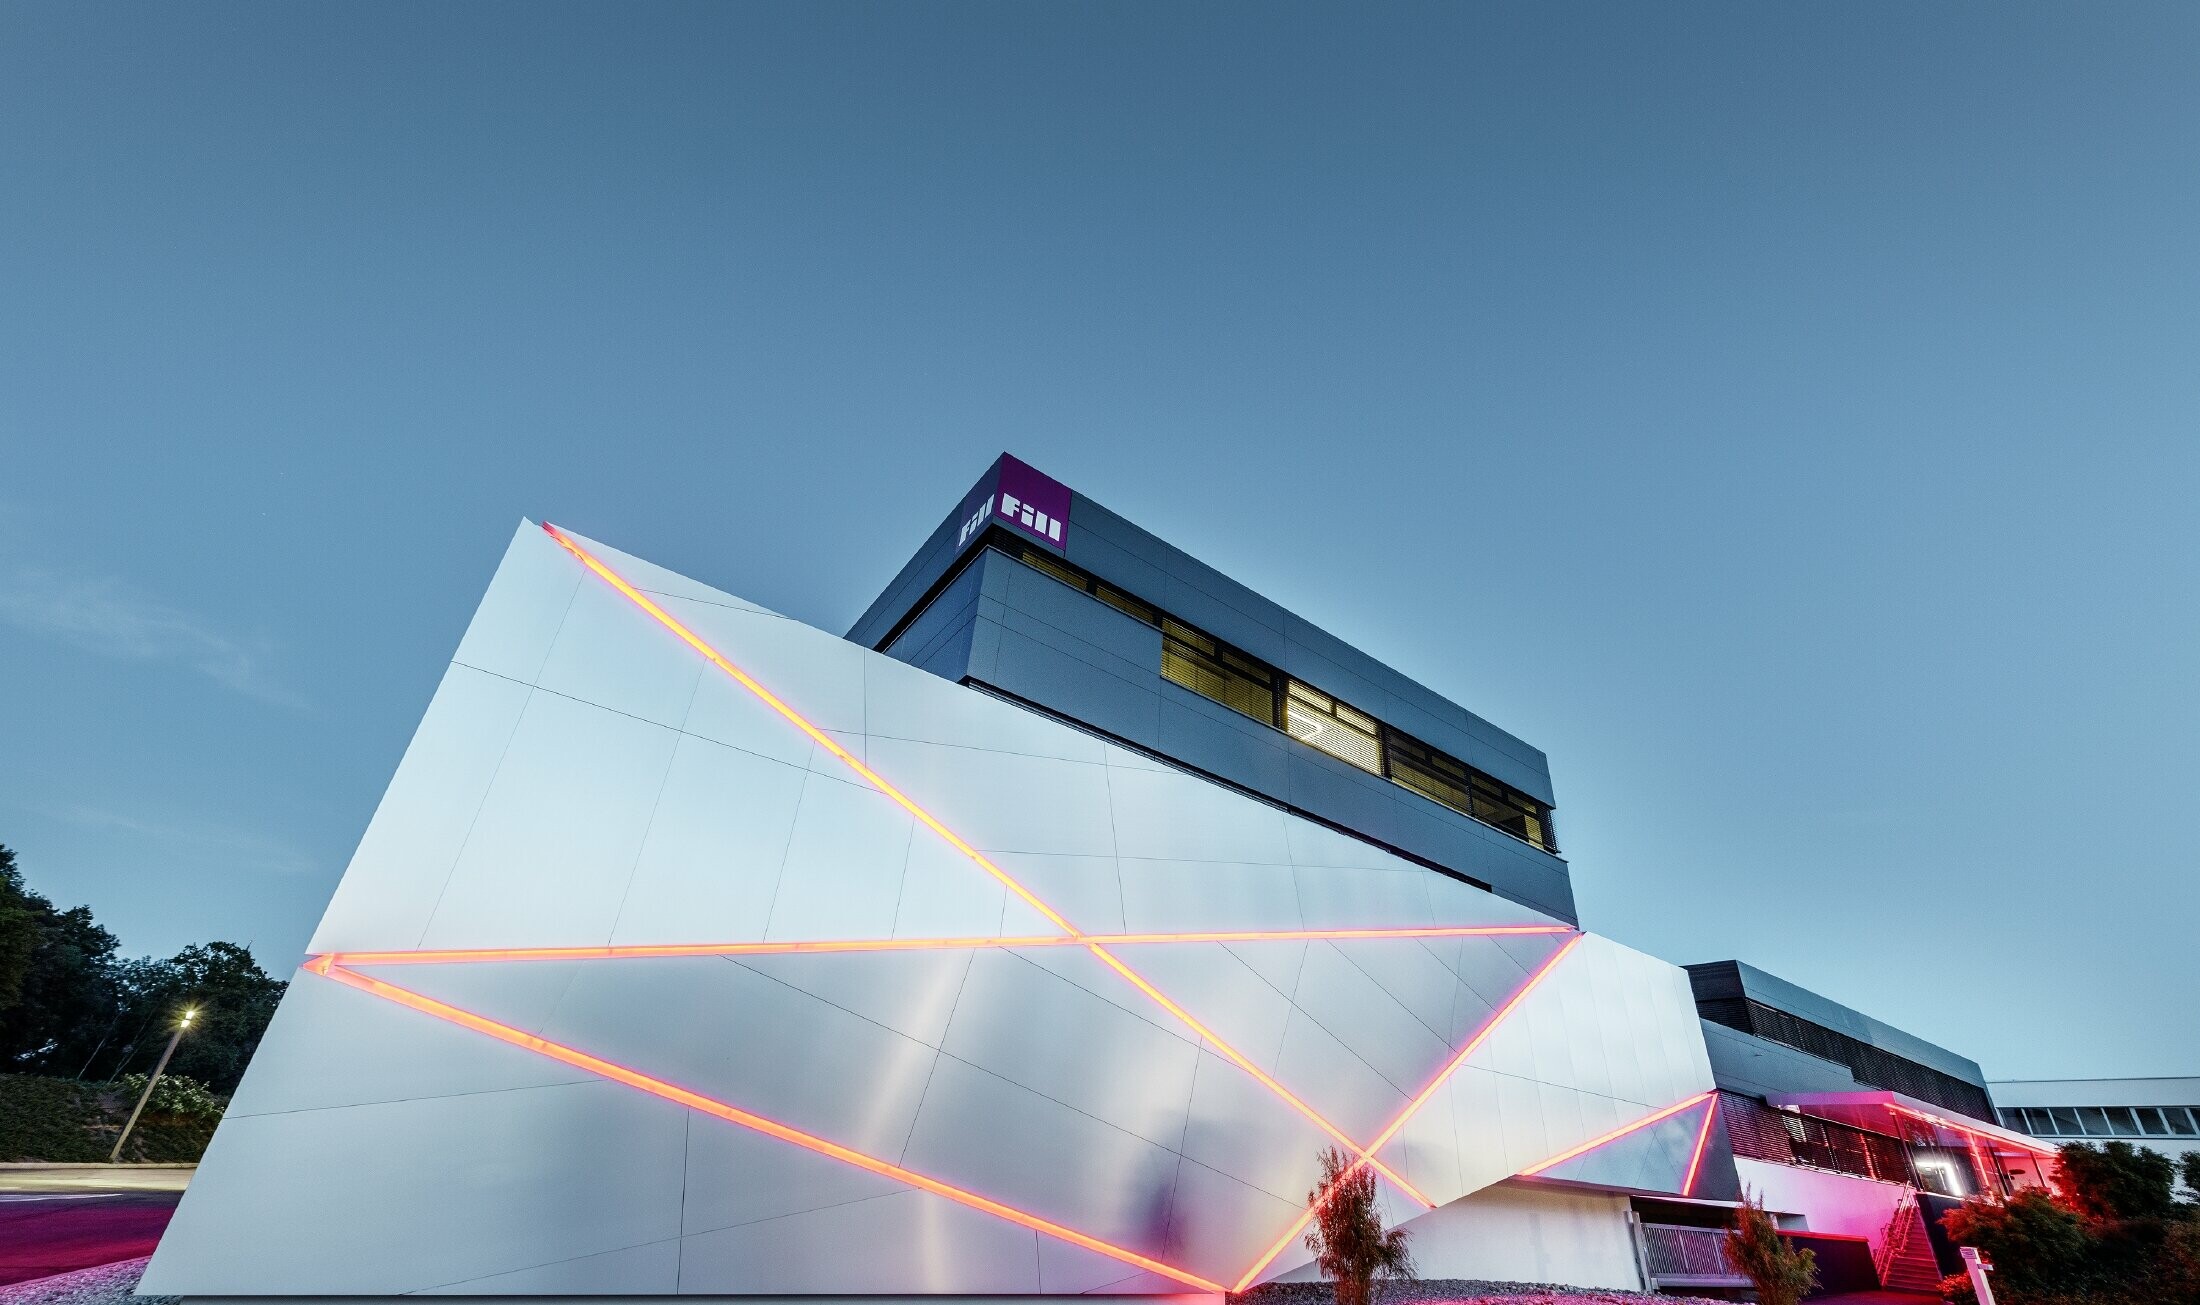 Fill company building with a futuristic aluminium composite panel façade in brushed aluminium and a backlit joint pattern